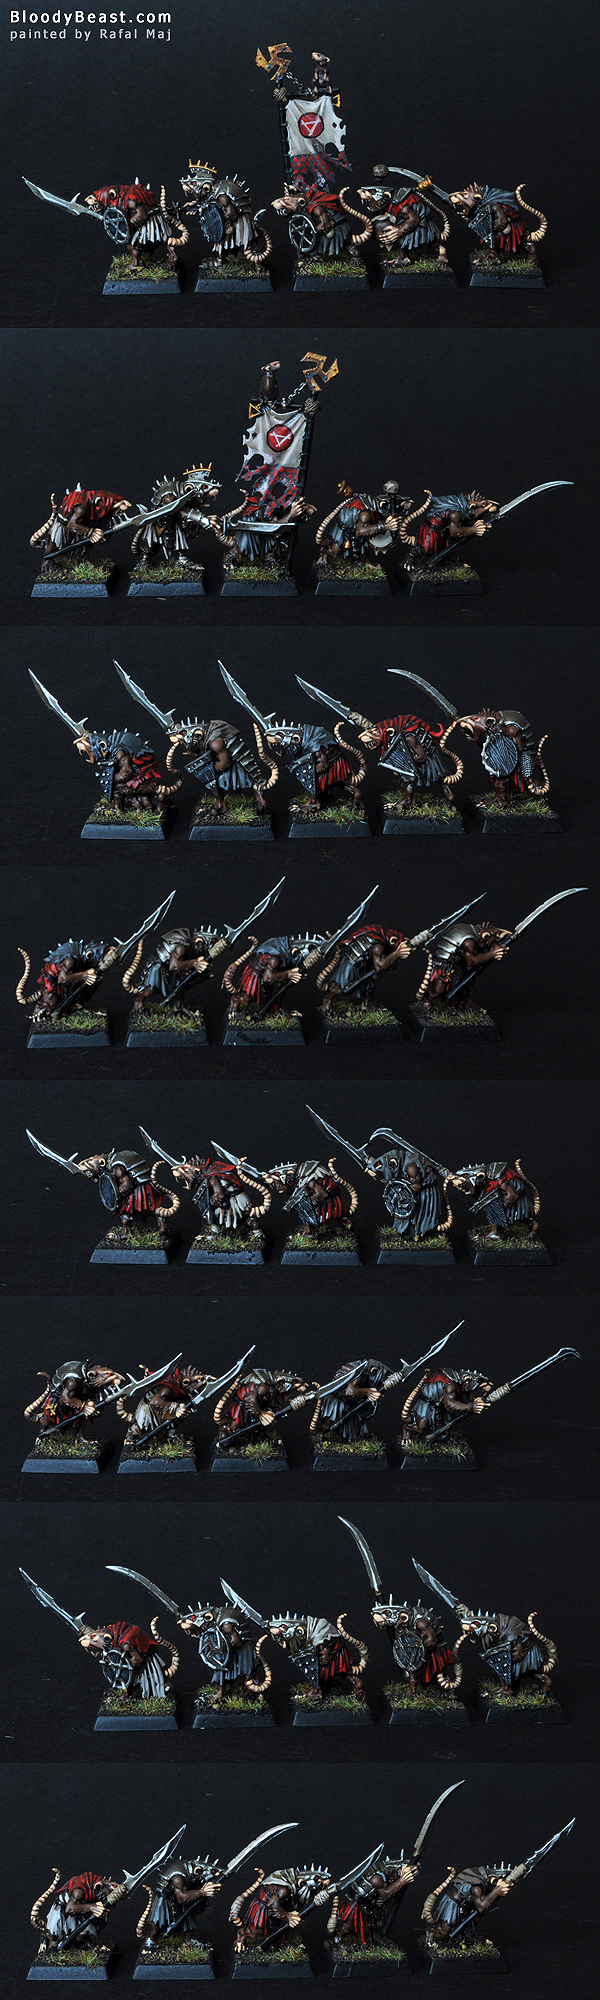 Skaven Clanrats with Spears painted by Rafal Maj (BloodyBeast.com)